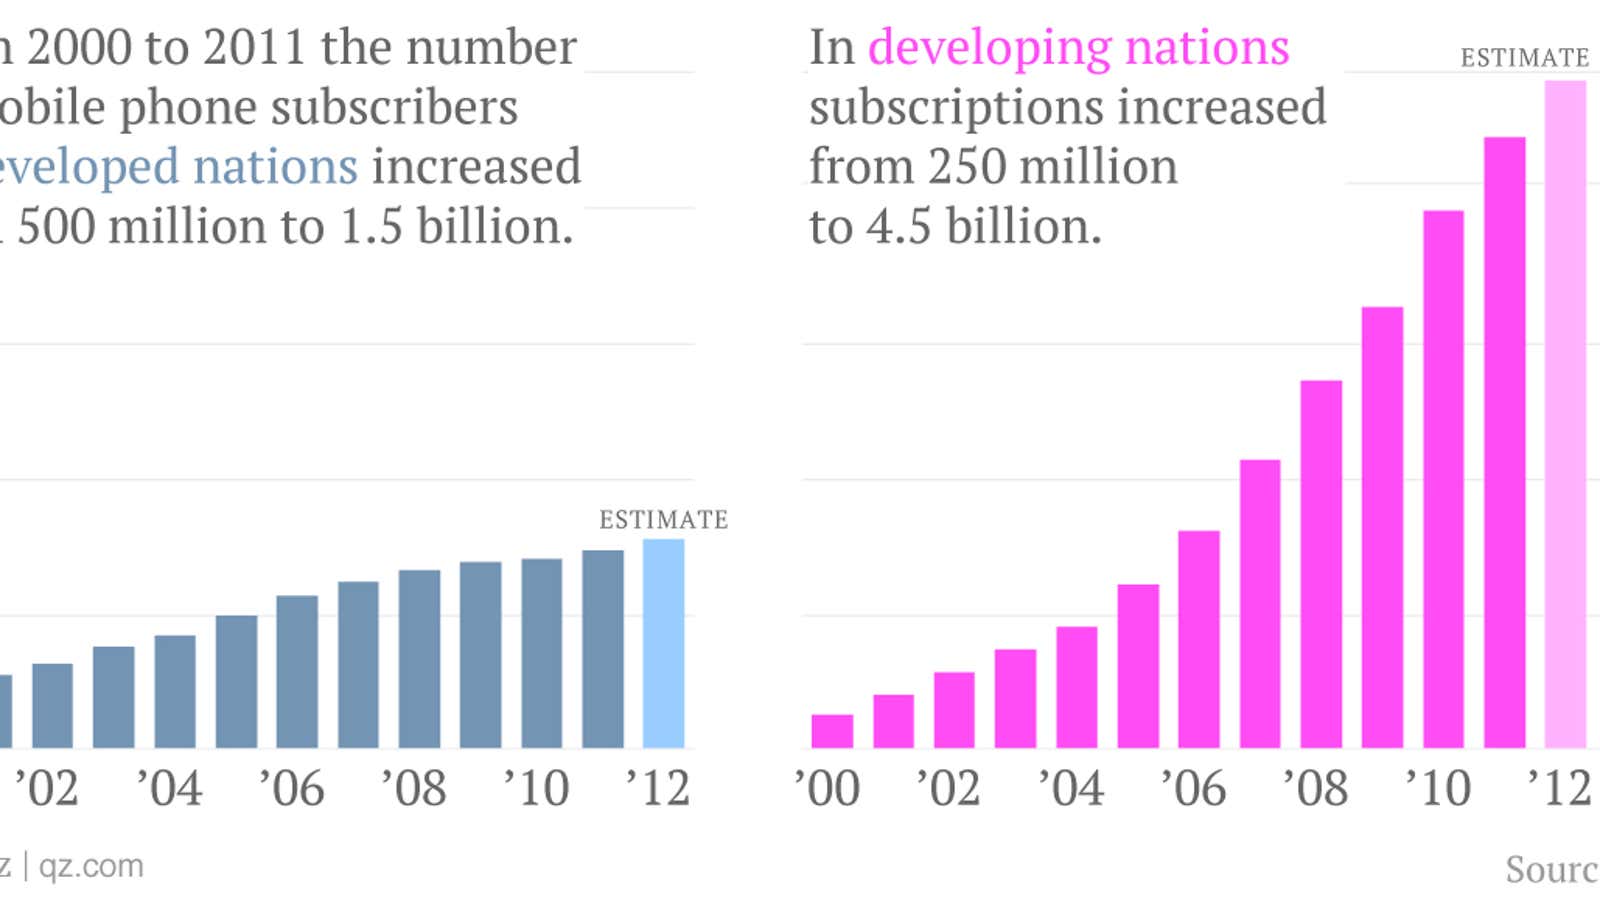 Since 2000, the number of mobile phones in the developing world has increased 1700%